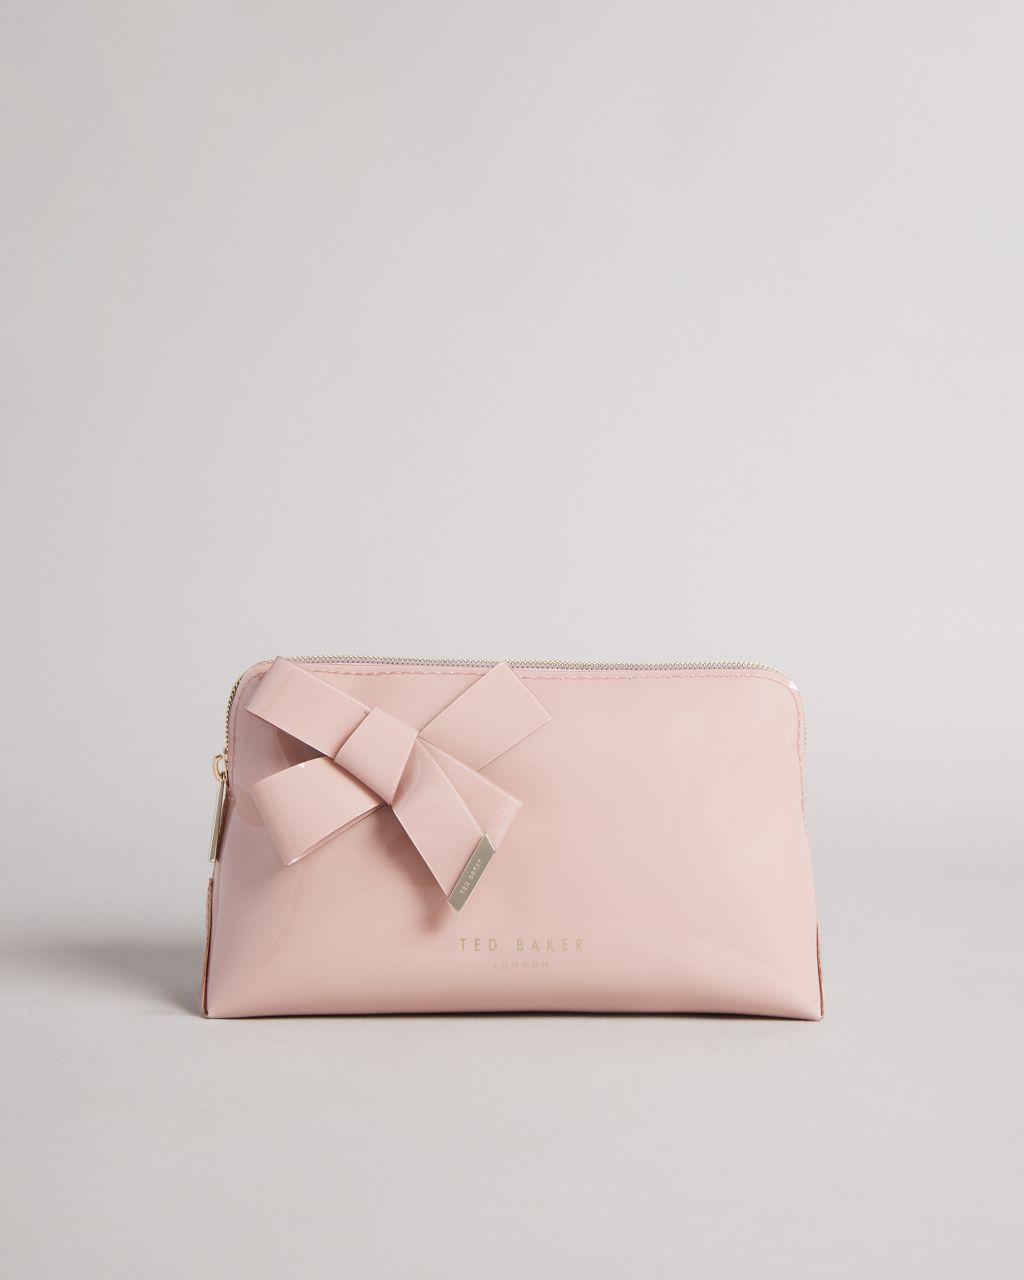 Ted Baker Women's Knot Bow Makeup Bag in Pale Pink, Nicolai